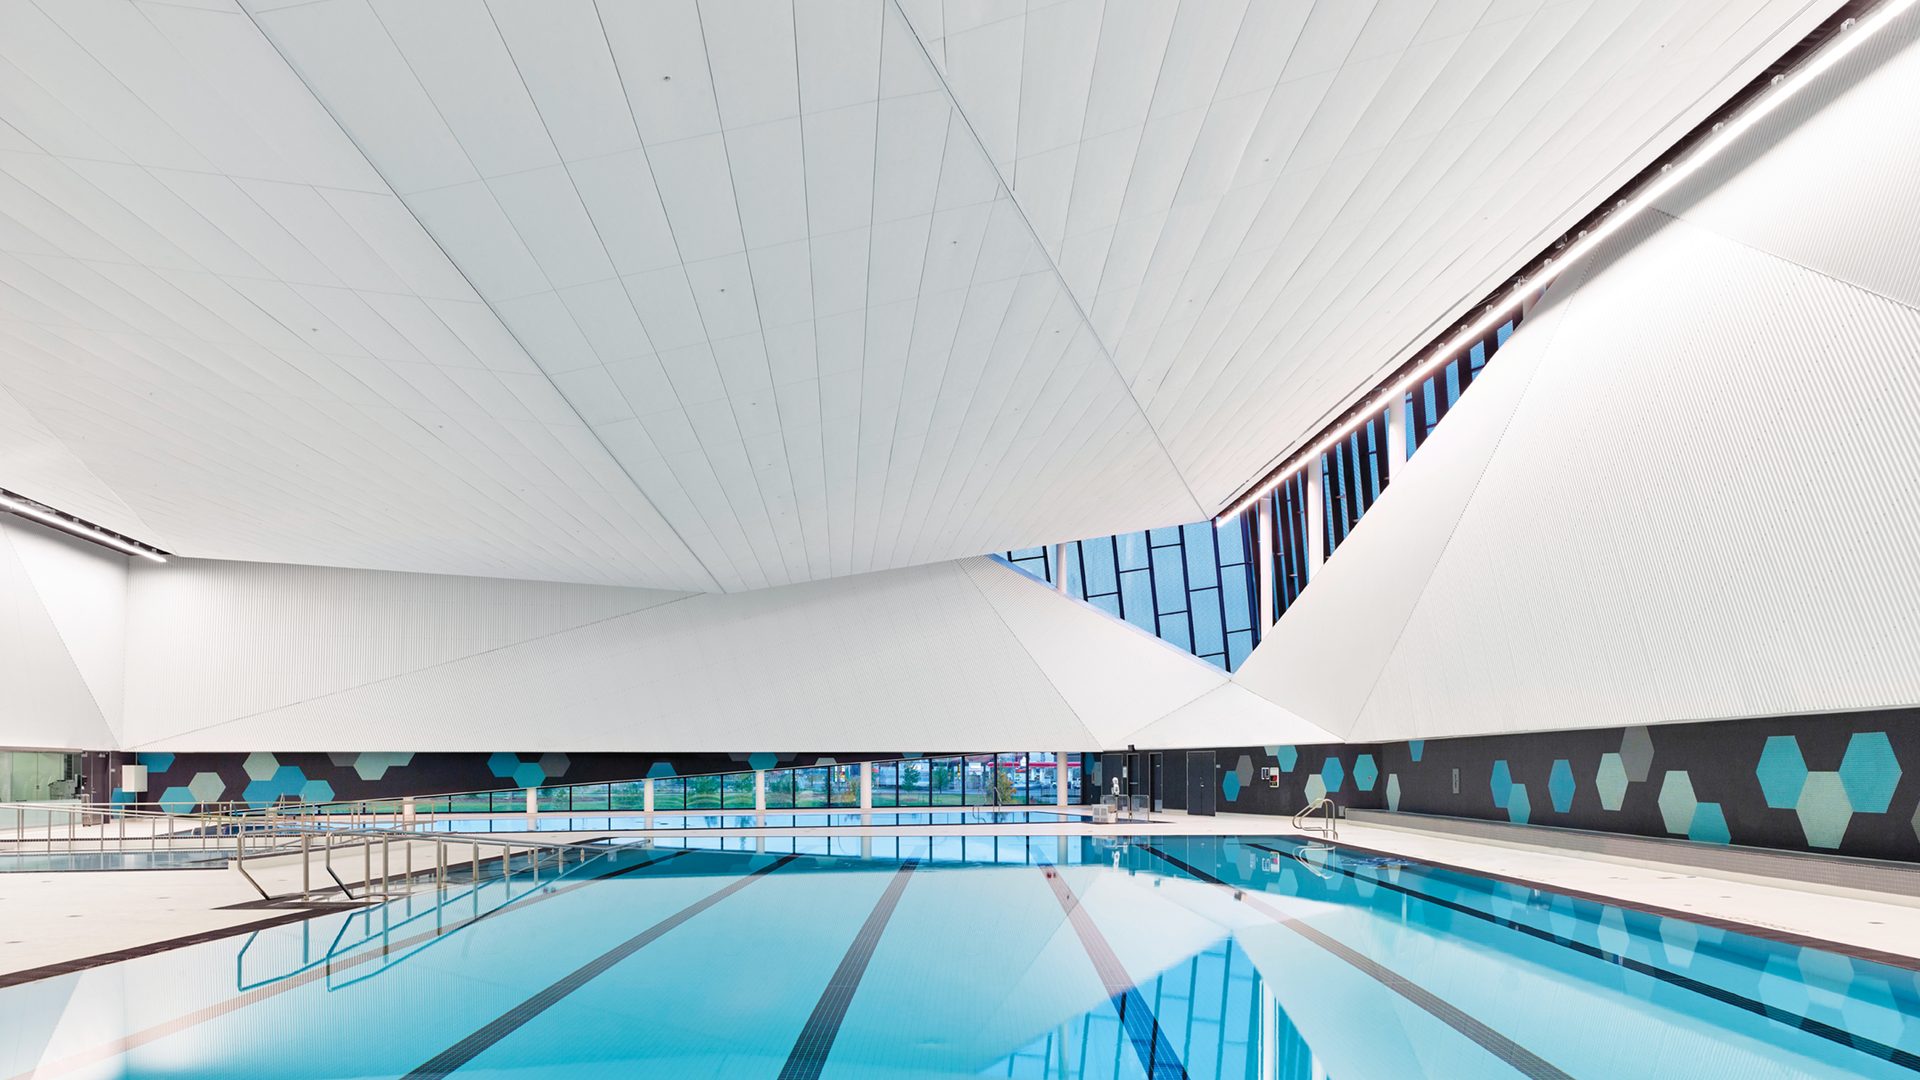 Modern indoor swimming pool with dramatic angled white ceiling system.